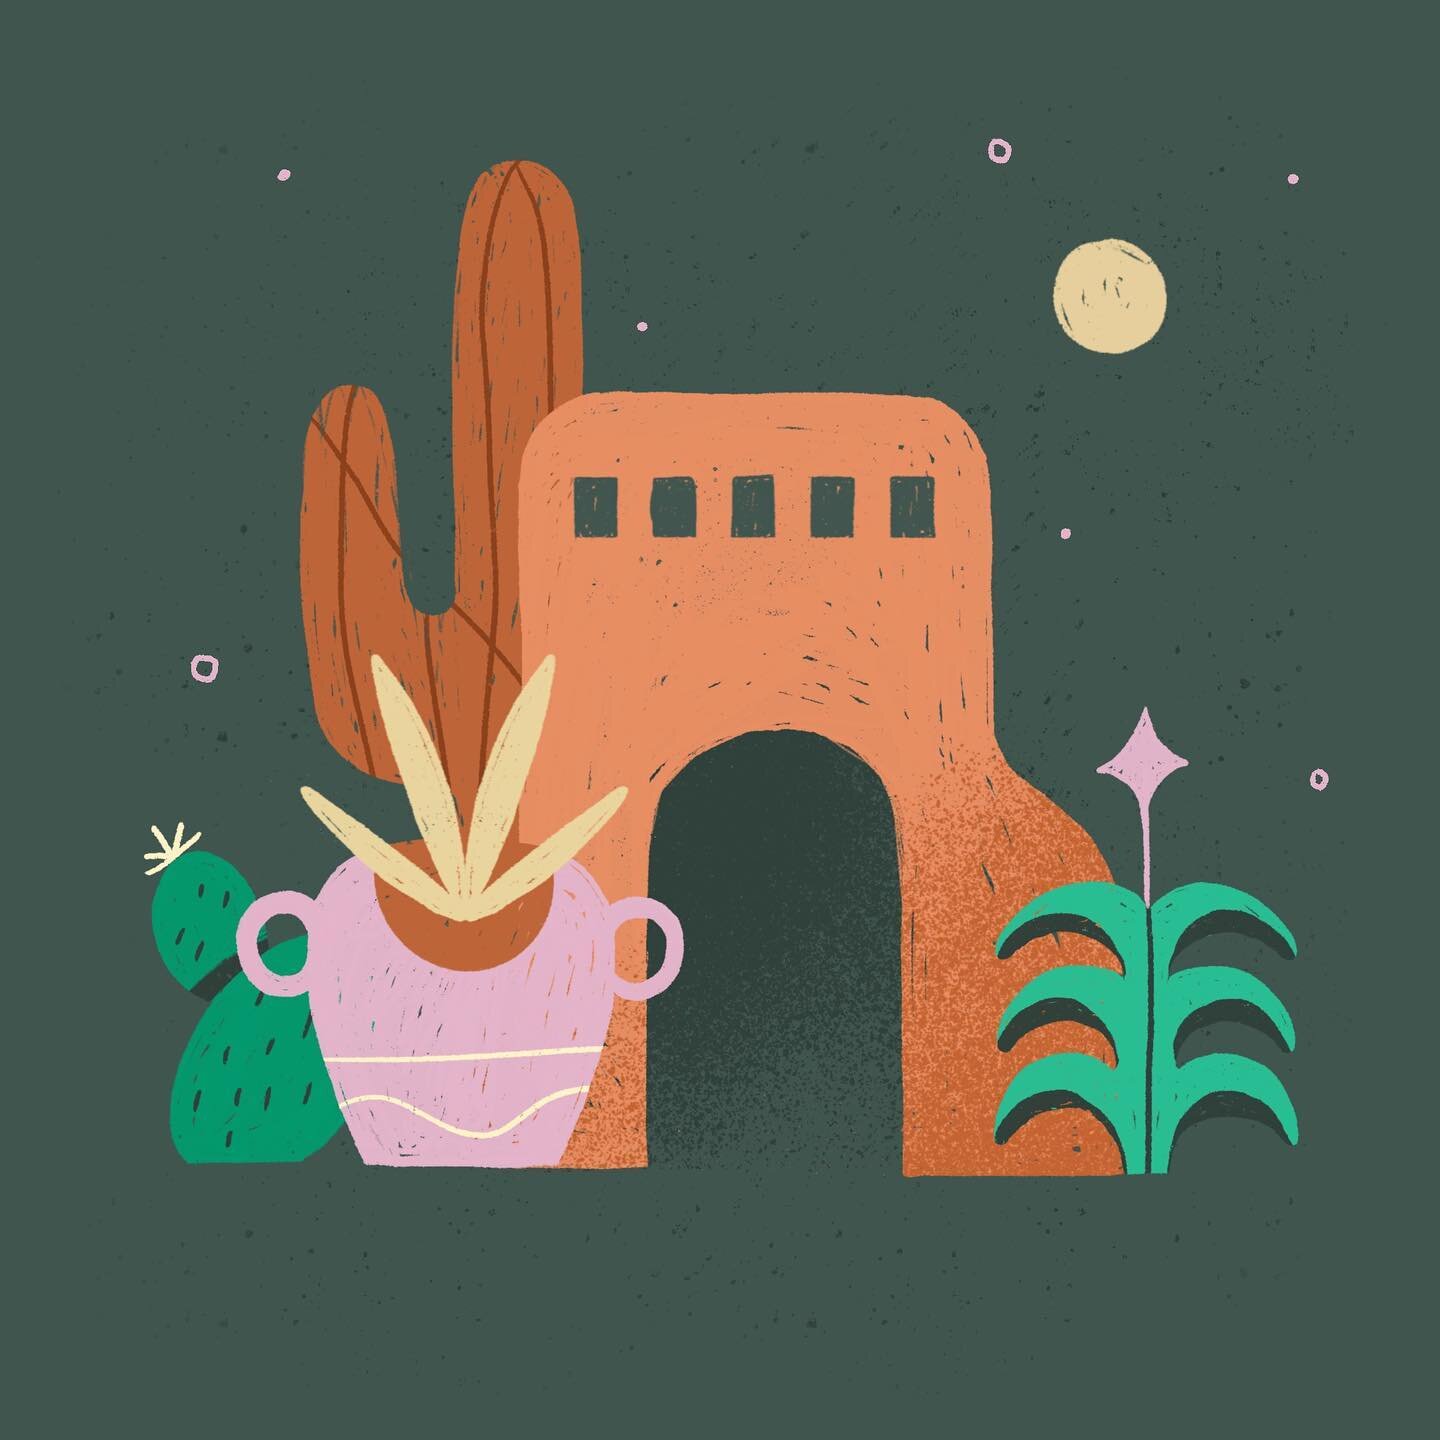 One last drawing inspired by the cactuses and architecture of the southwest 🌵 

#illustration #ipadpro #procreate #artistsoninstagram #arizona